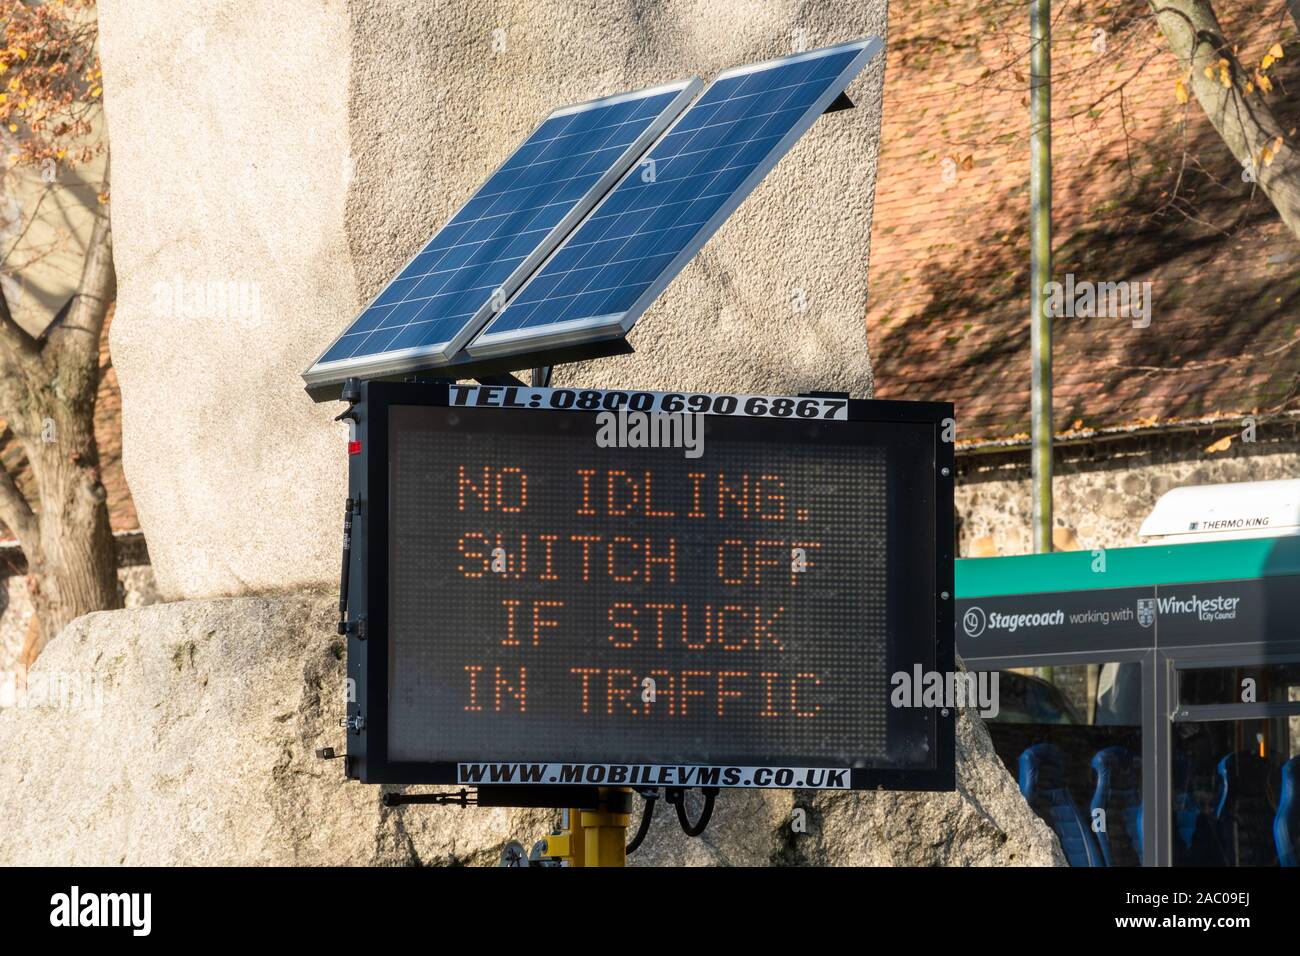 No idling switch off if stuck in traffic - road sign promoting lower pollution and better air quality in city centre, UK Stock Photo